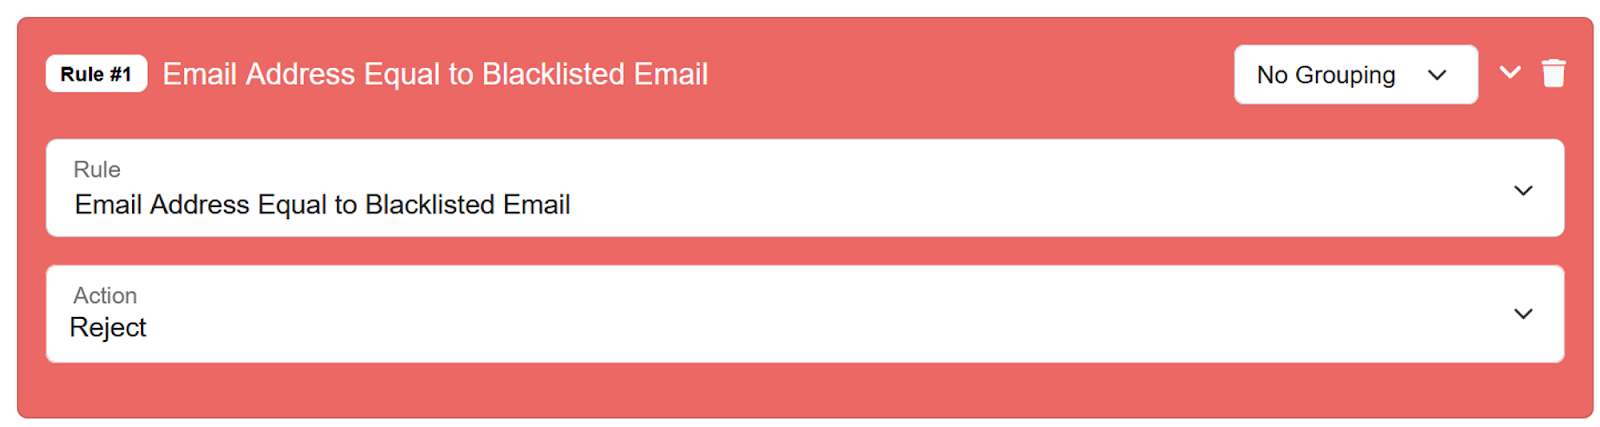 Fraud validation rule by blacklisted email